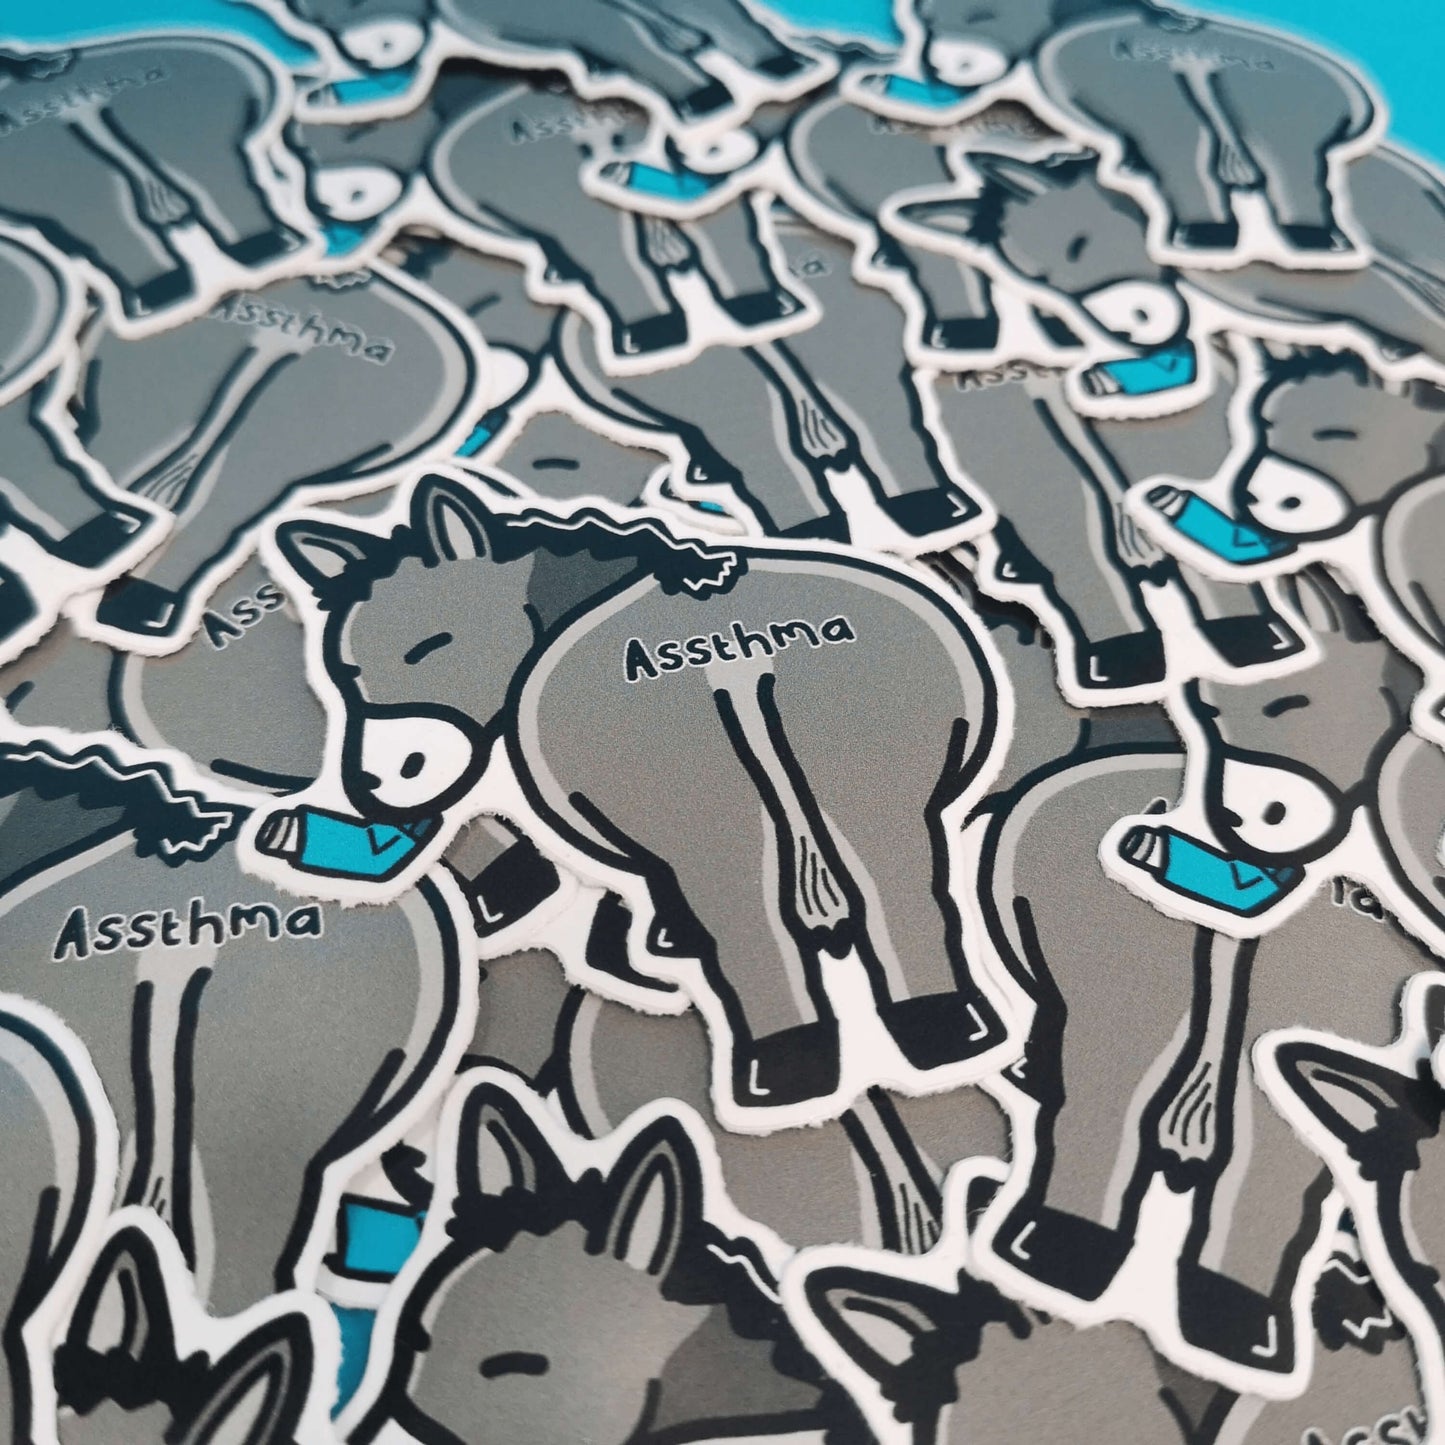 Assthma Sticker - Asthma shown laying over multiple stickers. A grey donkey ass showing its behind with a blue asthma pump in its mouth and the word Assthma across its behind. The sticker is designed to raise awareness for asthma.